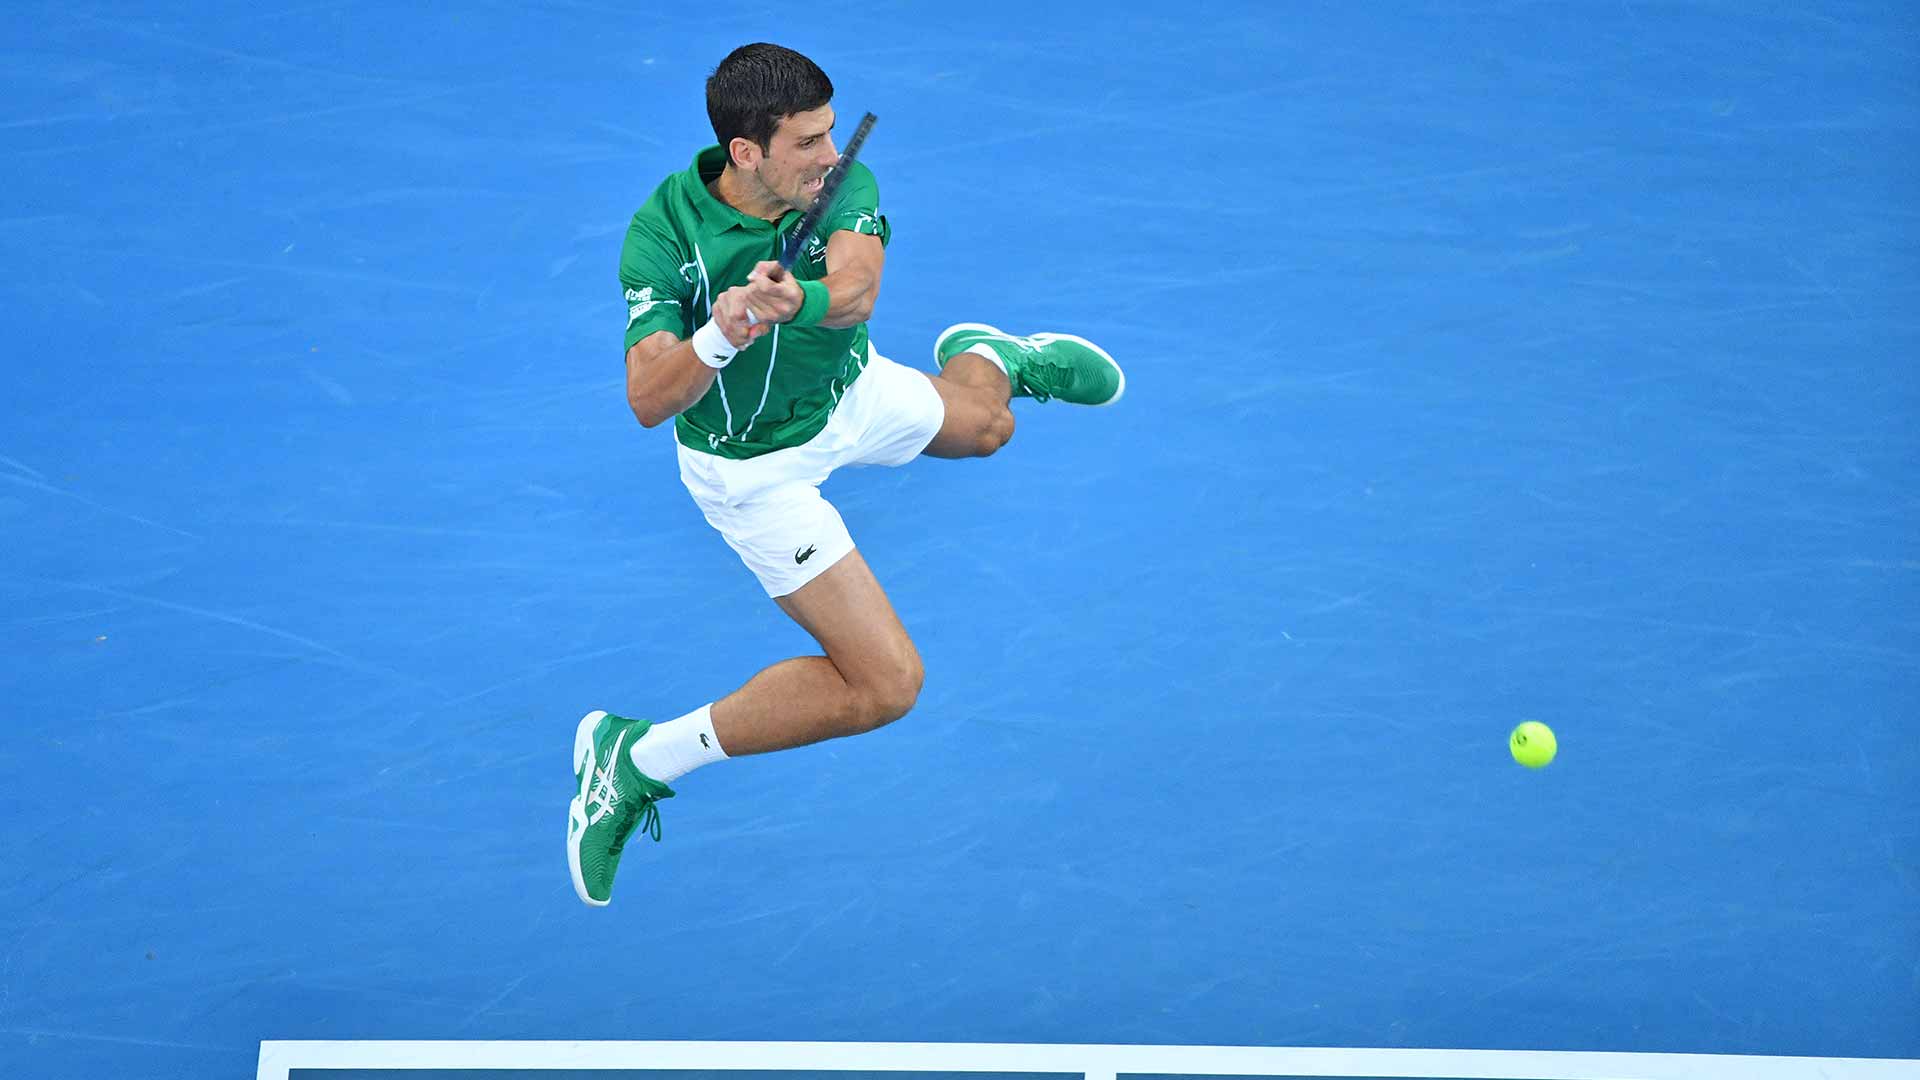 Novak Djokovic battles back in the first set en route to beating Roger Federer on Thursday for a place in his eighth Australian Open final.